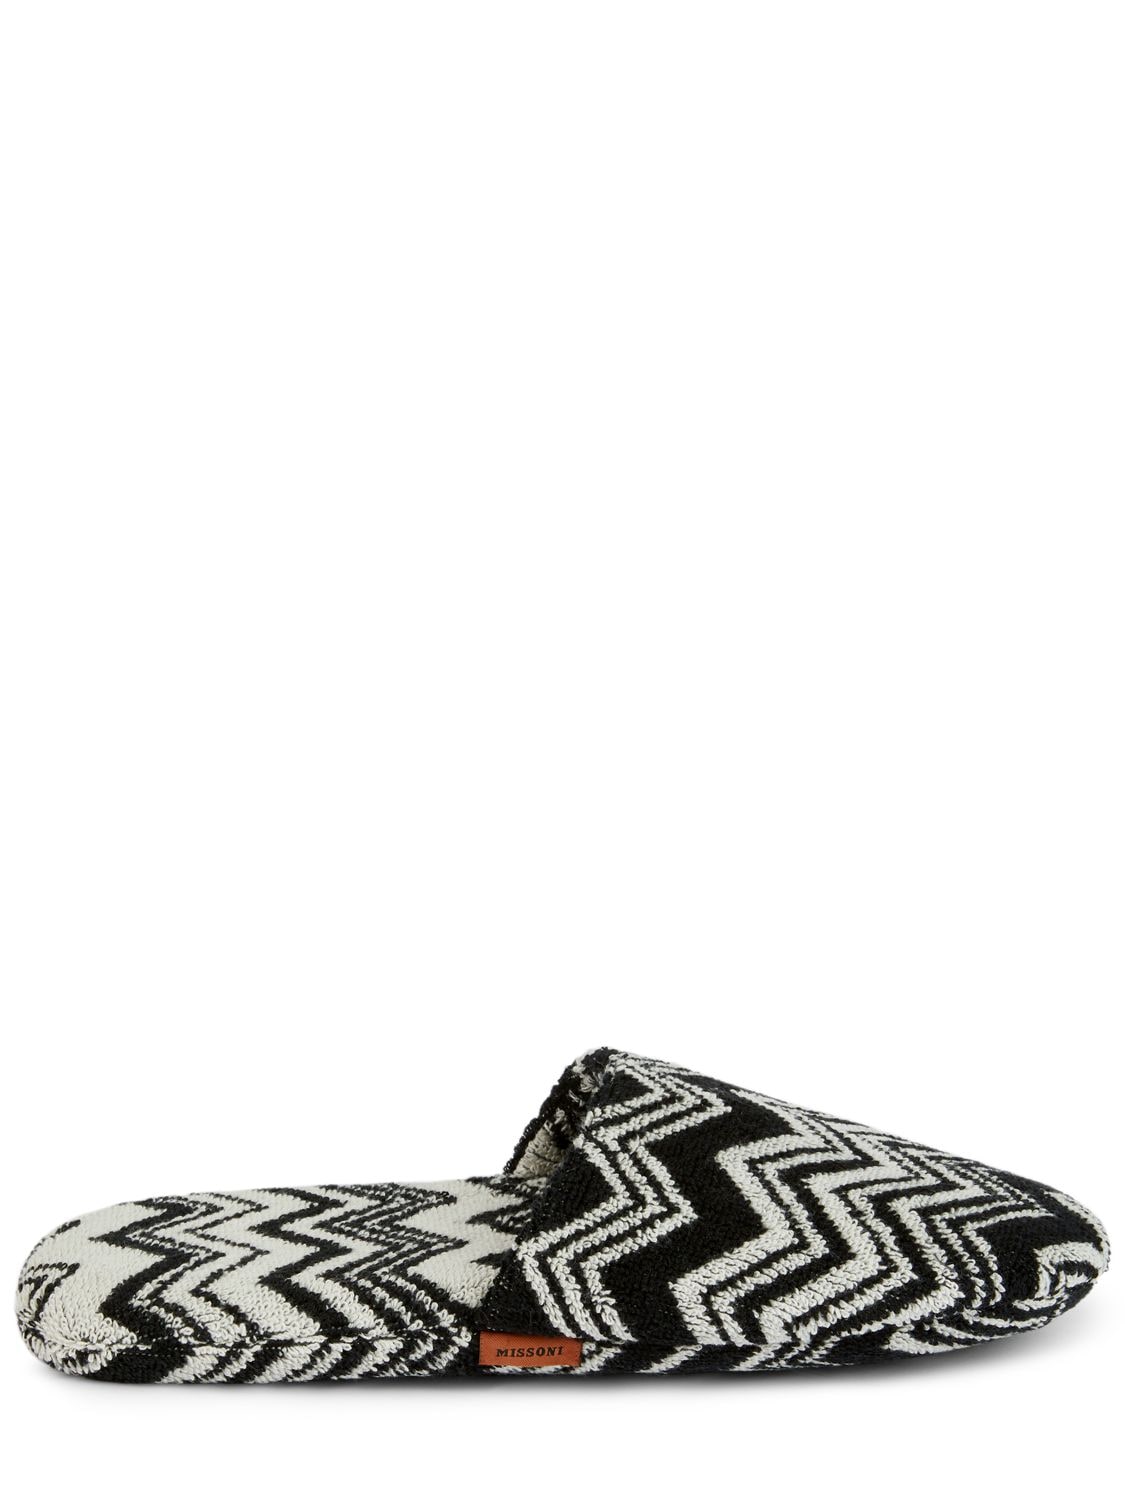 Missoni Home Collection Keith Bath Slippers In Black,white